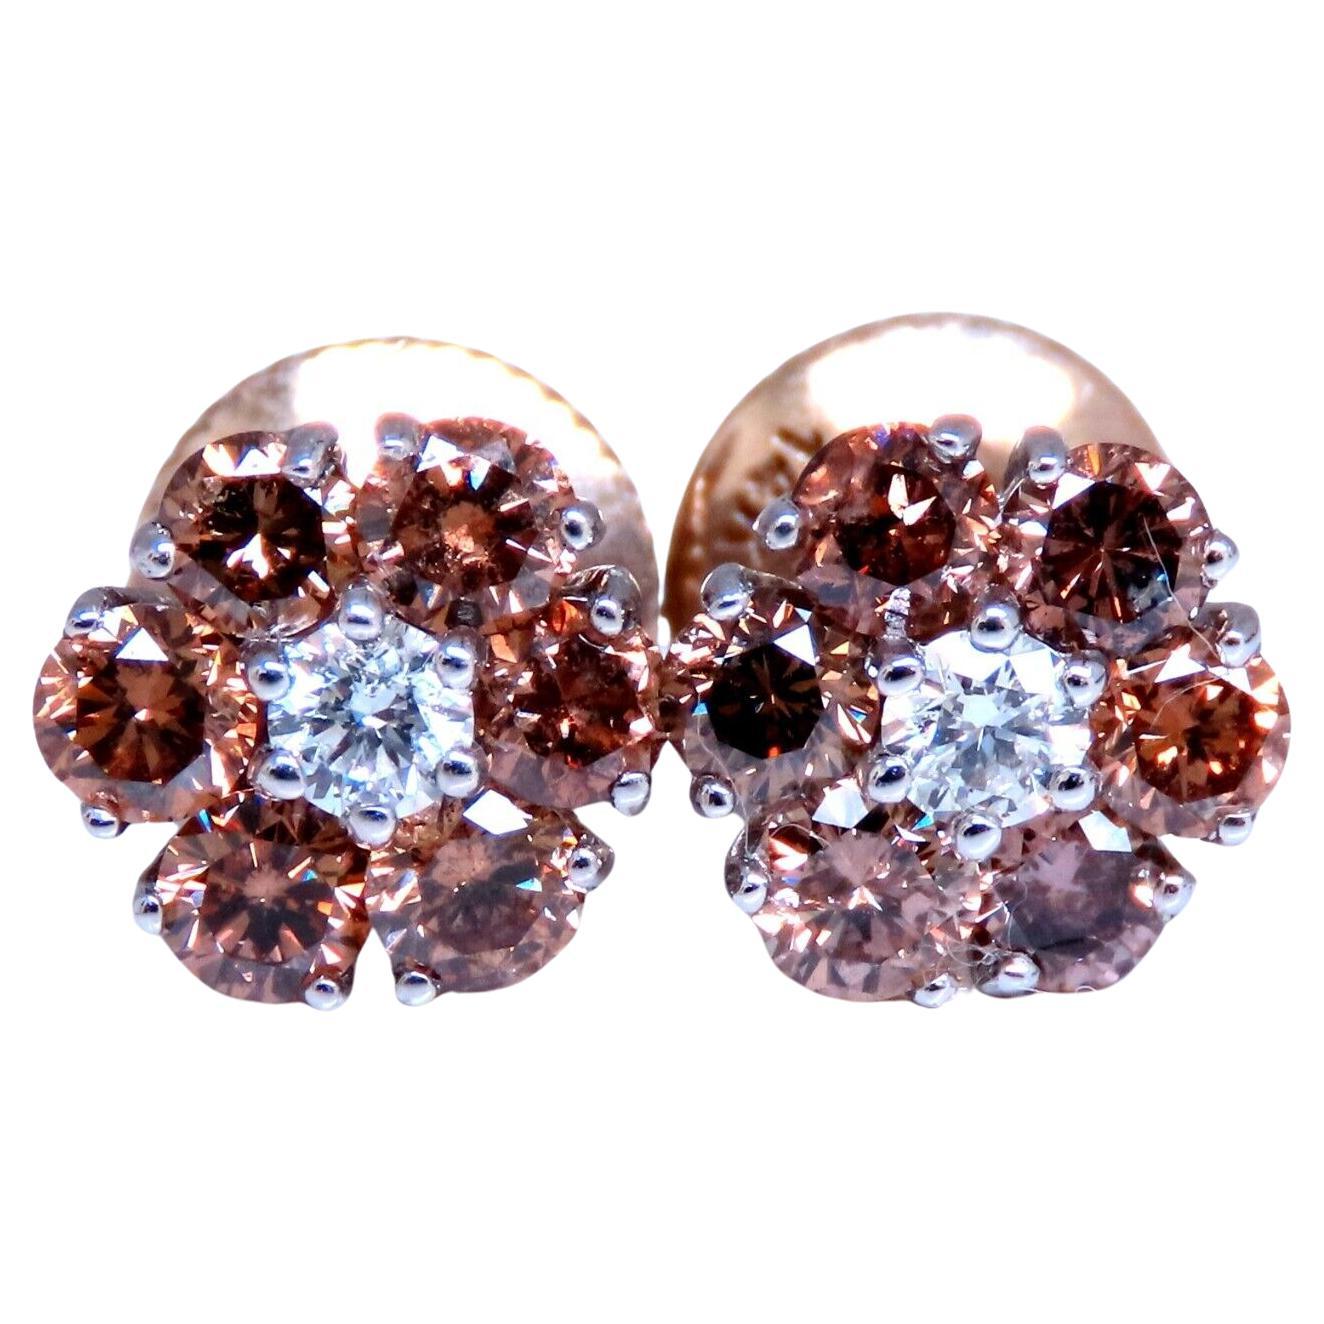 1.30ct. natural round diamond cluster earrings 14 karat Fancy Browns For Sale